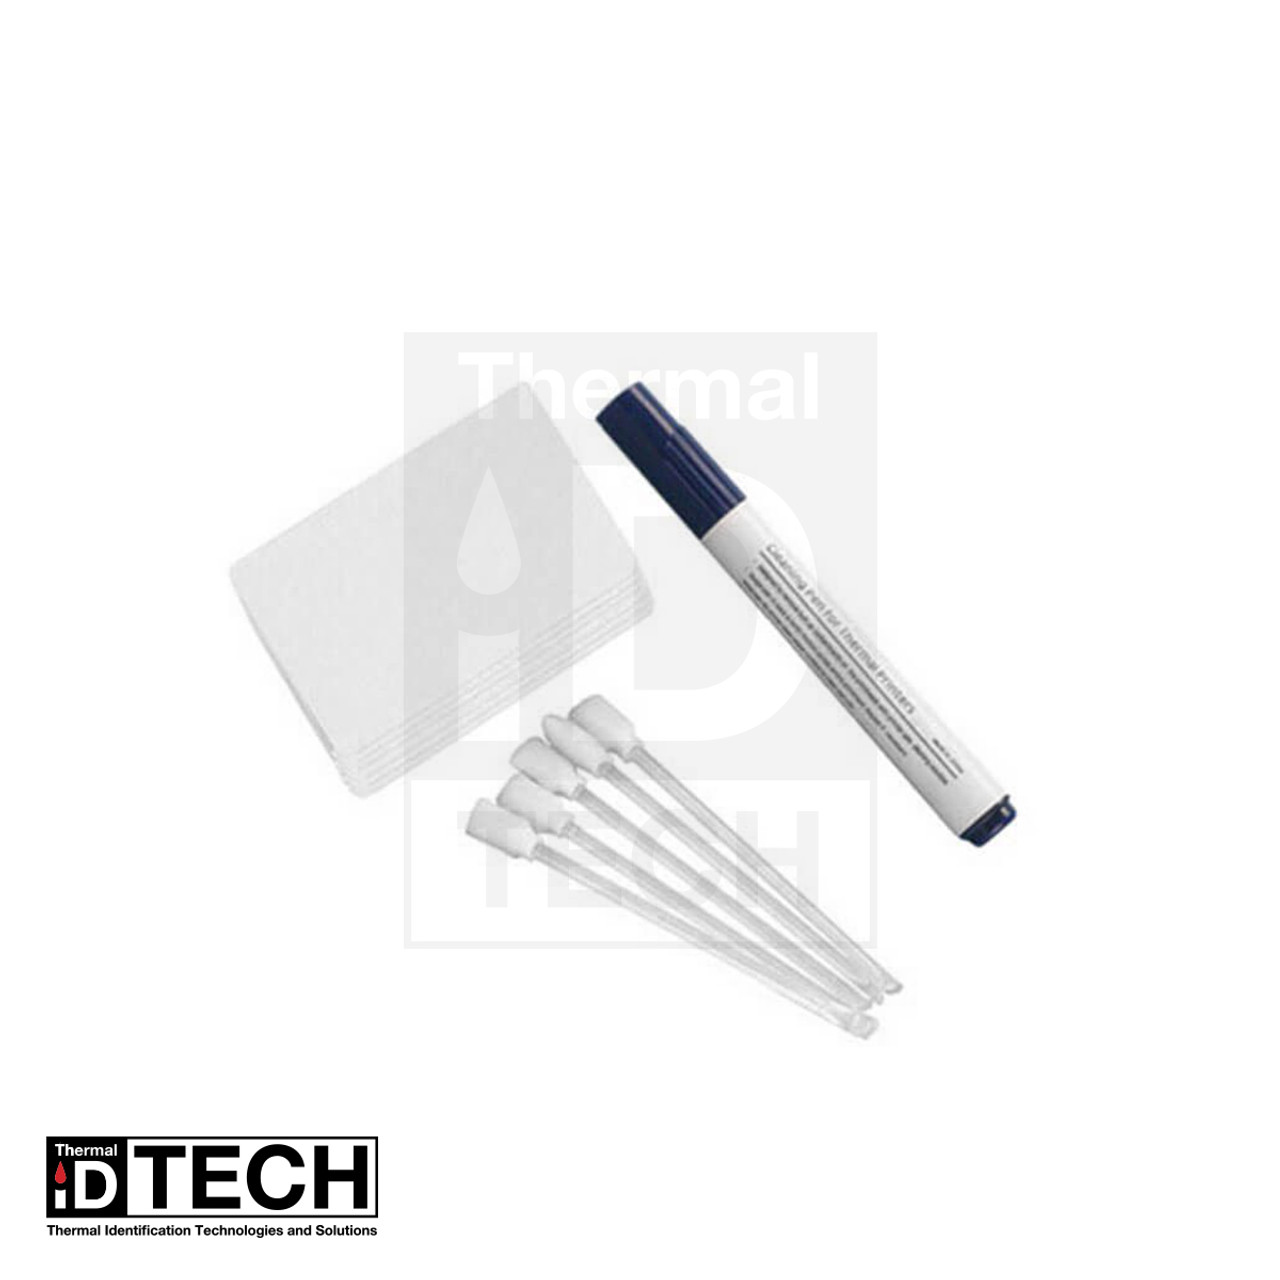 Kicteam Printer Cleaning Pen with Adhesive Remover KT-PJC2B12AR-1 - Team One